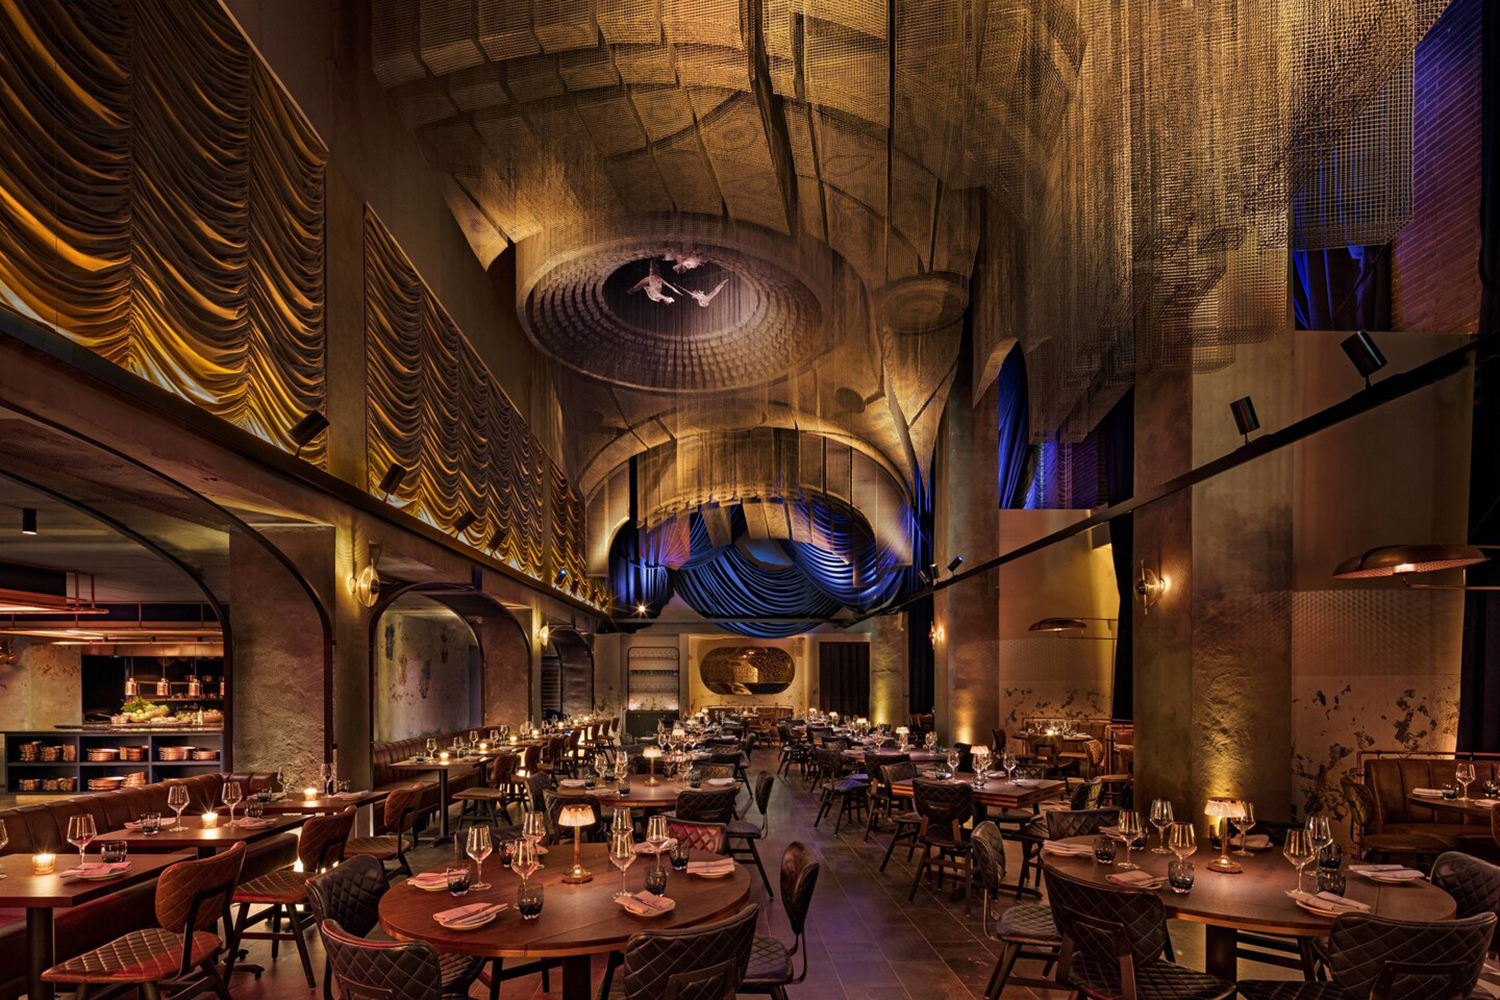 Theatrical restaurant at the Moxy East Village